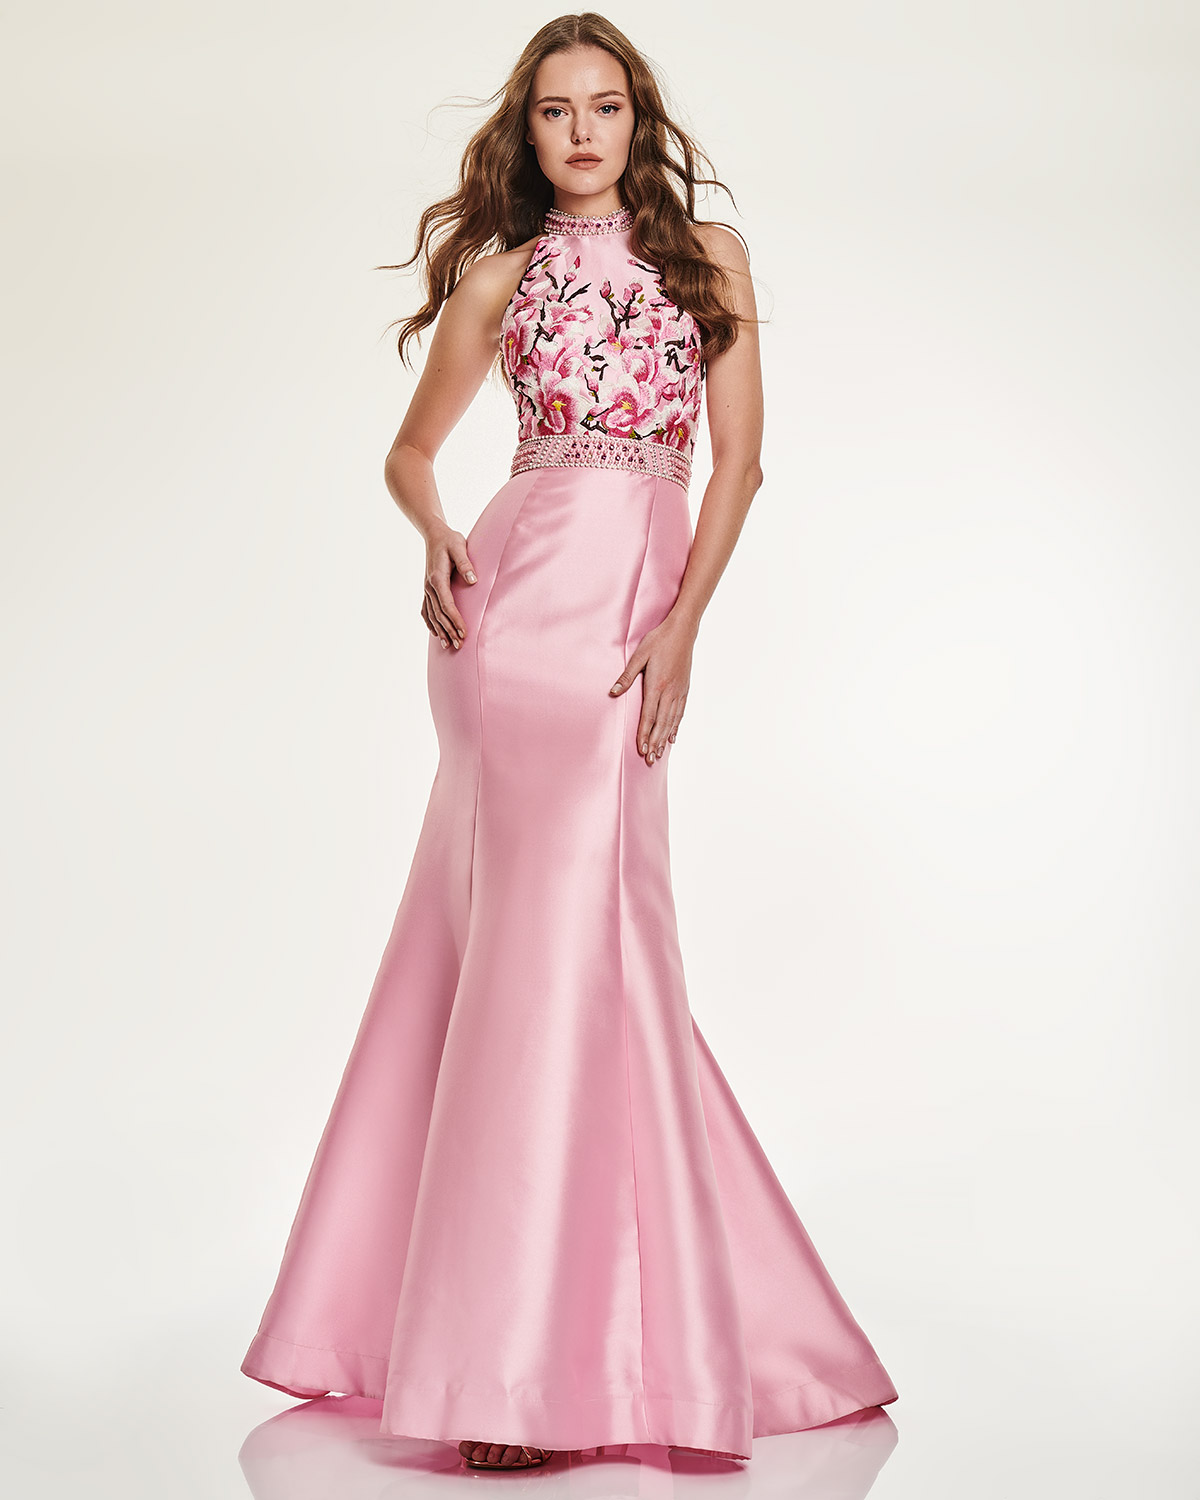 Cocktail Dresses / Long Evening Dress with floral bust and beading